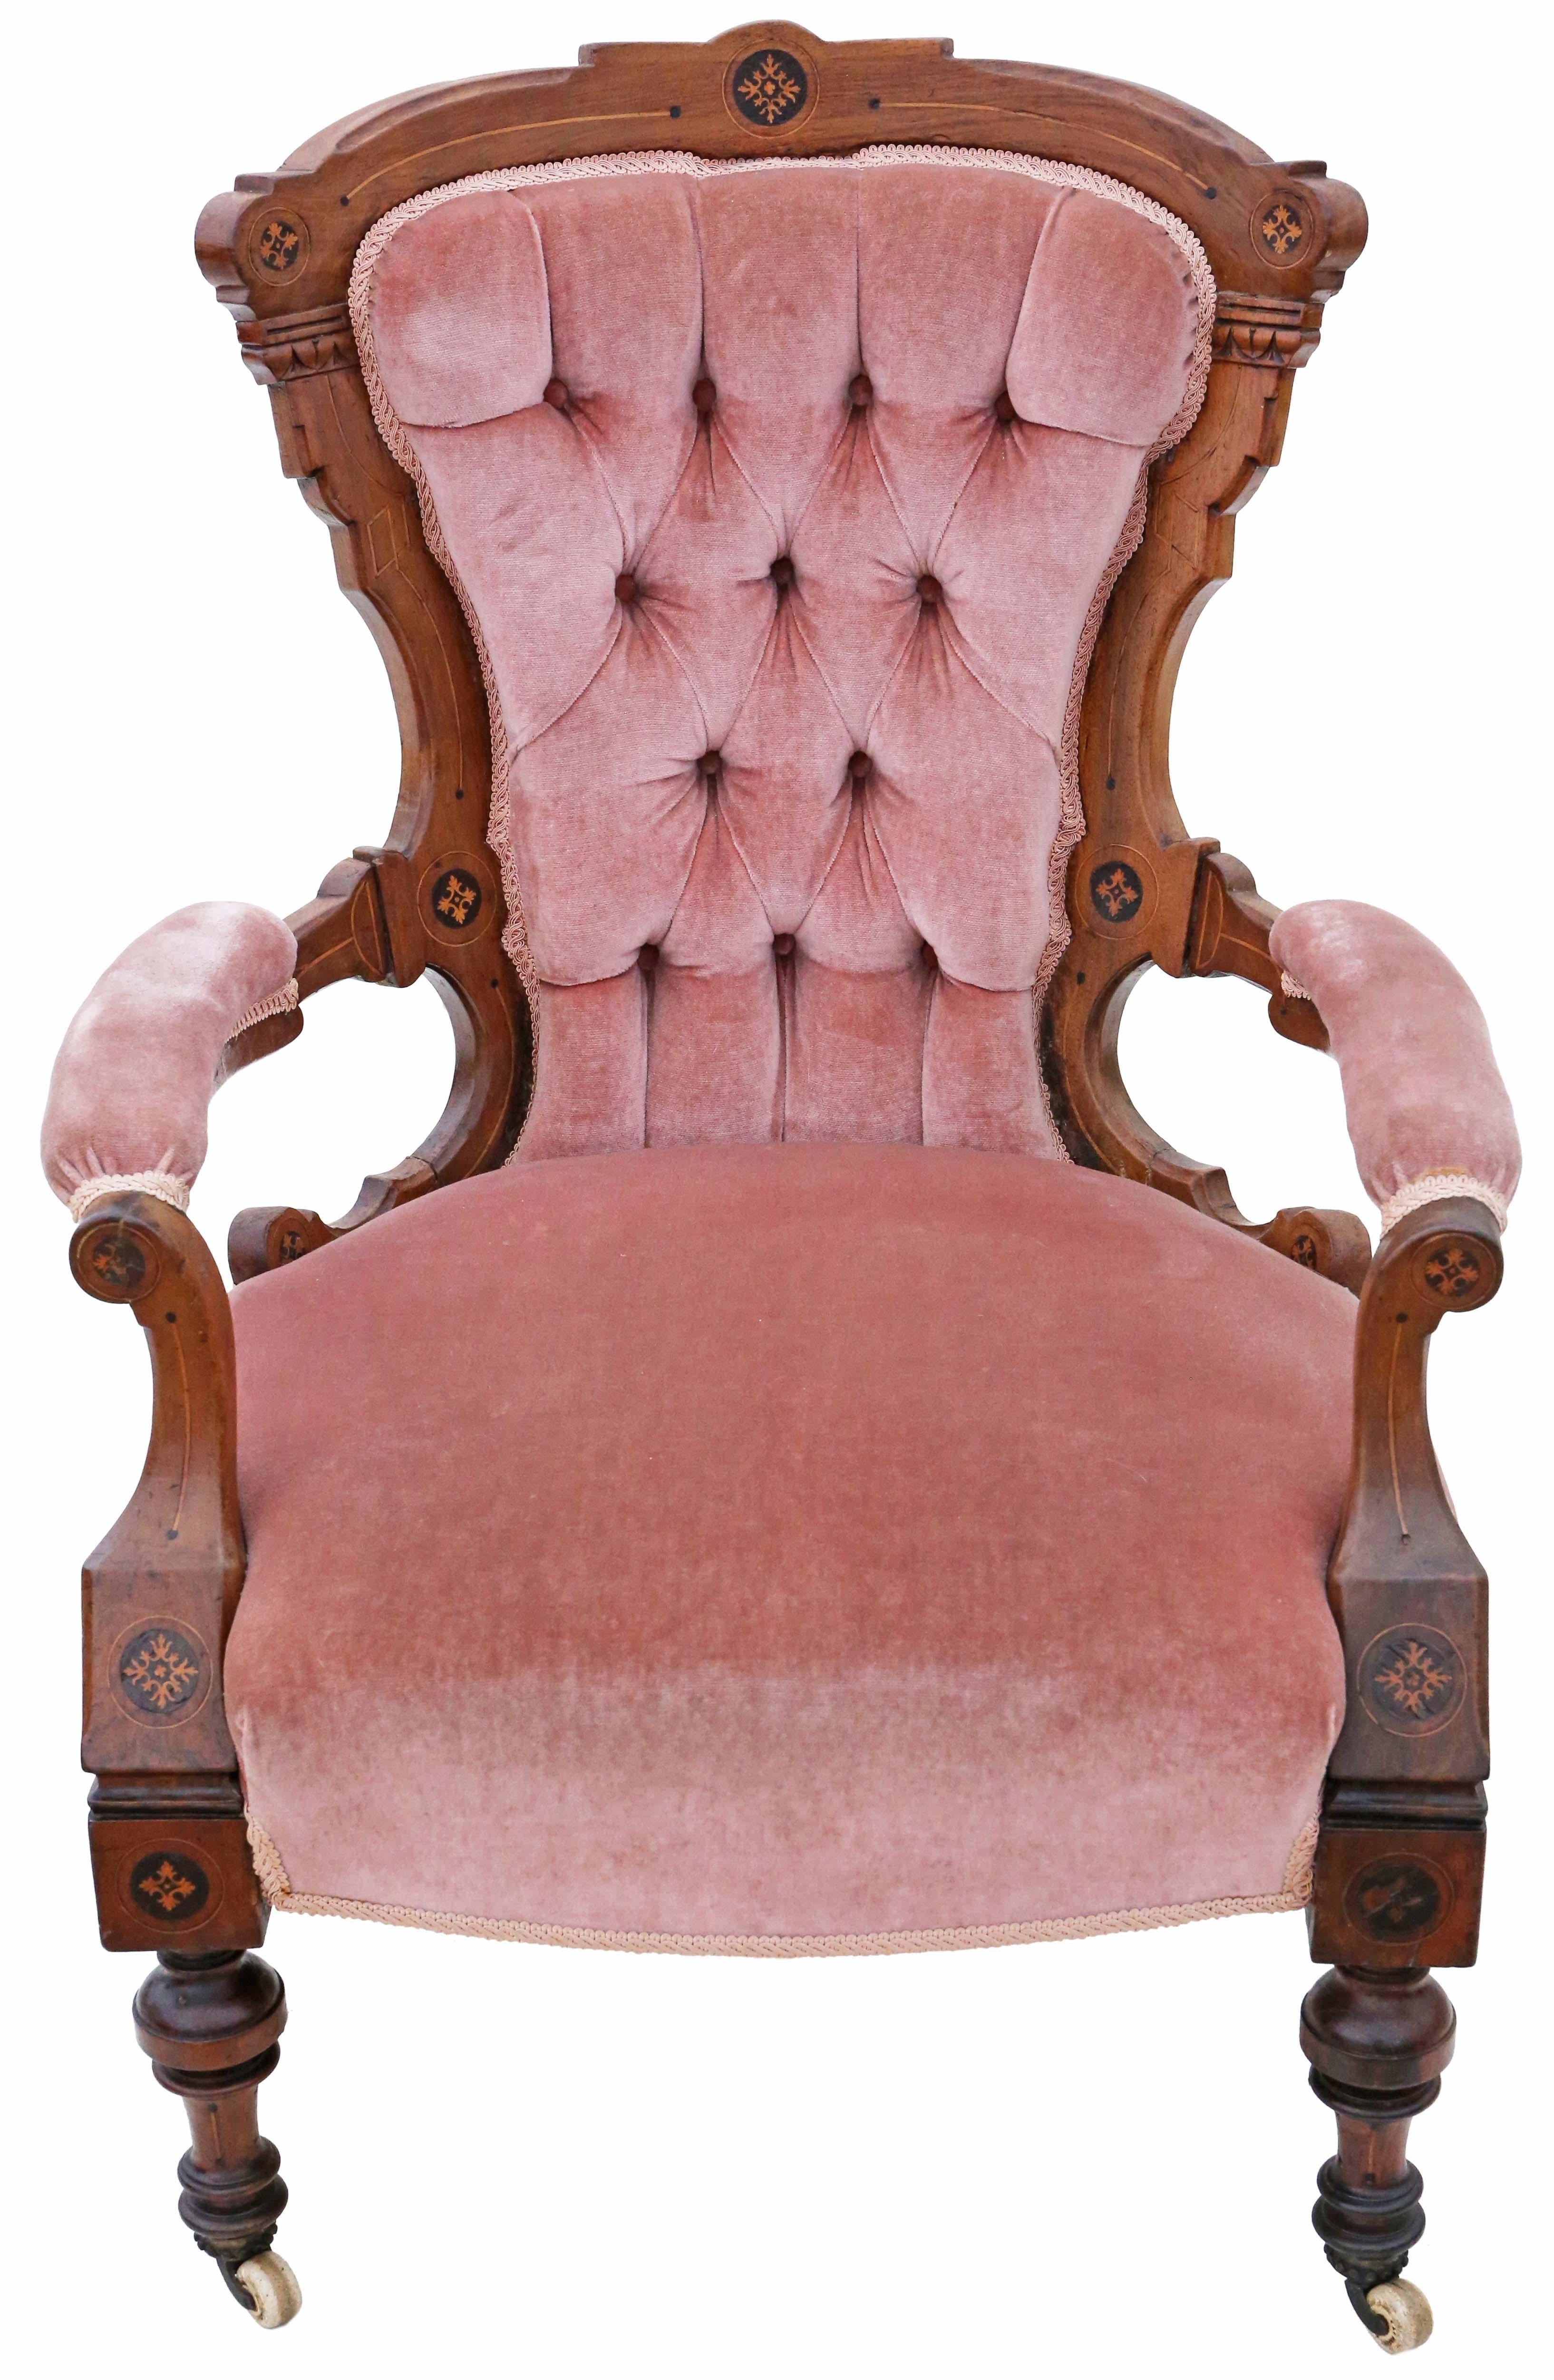 Antique quality Victorian Aesthetic inlaid walnut armchair C1880. Very attractive Aesthetic inlays.

Solid, no loose joints and no woodworm. Full of age, character and charm. A very decorative chair. The dusky pink velour upholstery is not new and